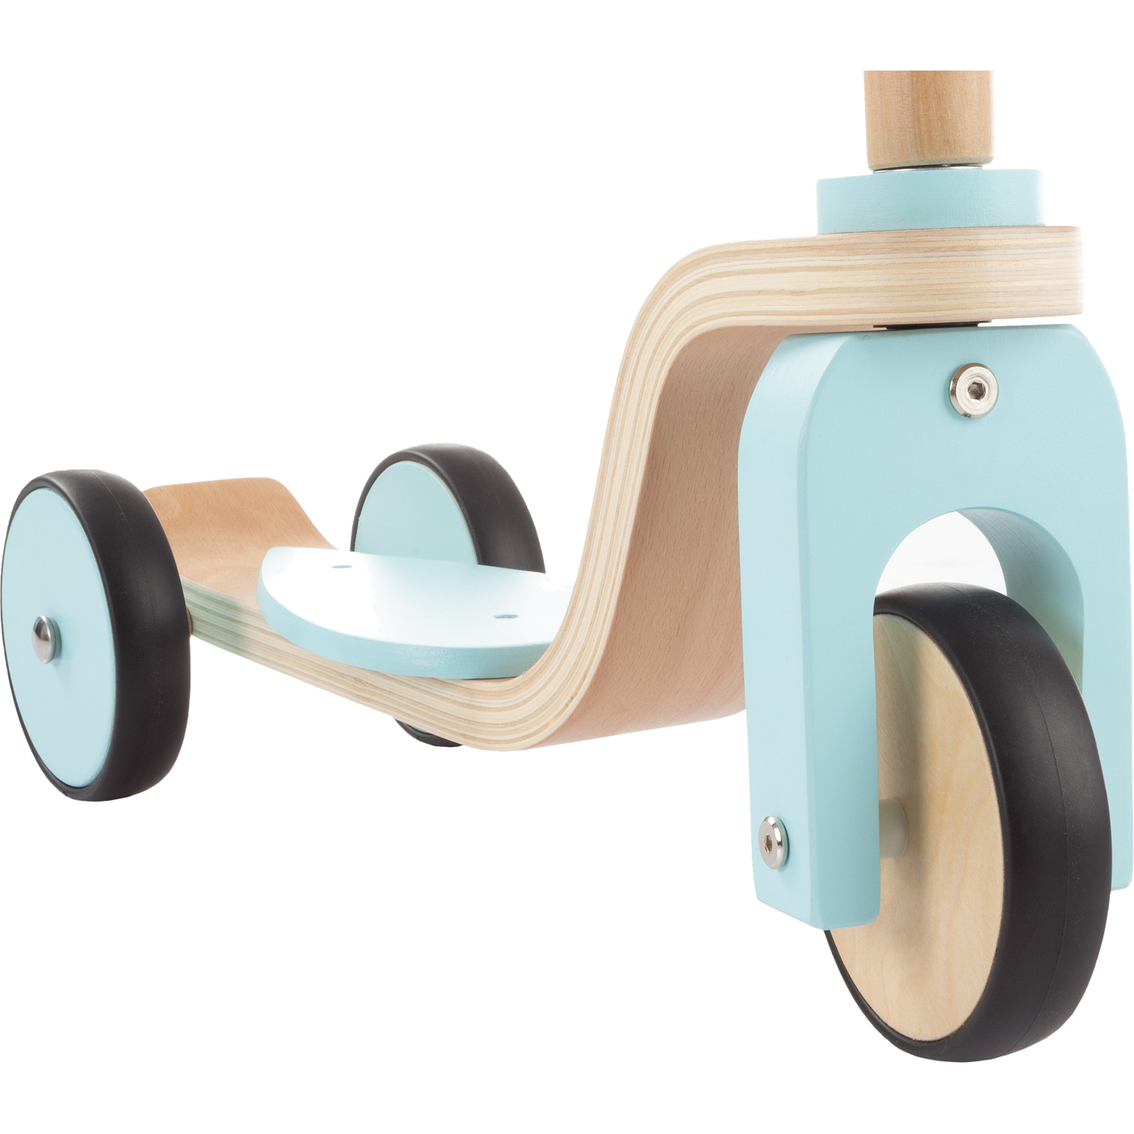 Lil' Rider Wooden Kick Scooter - Image 5 of 6